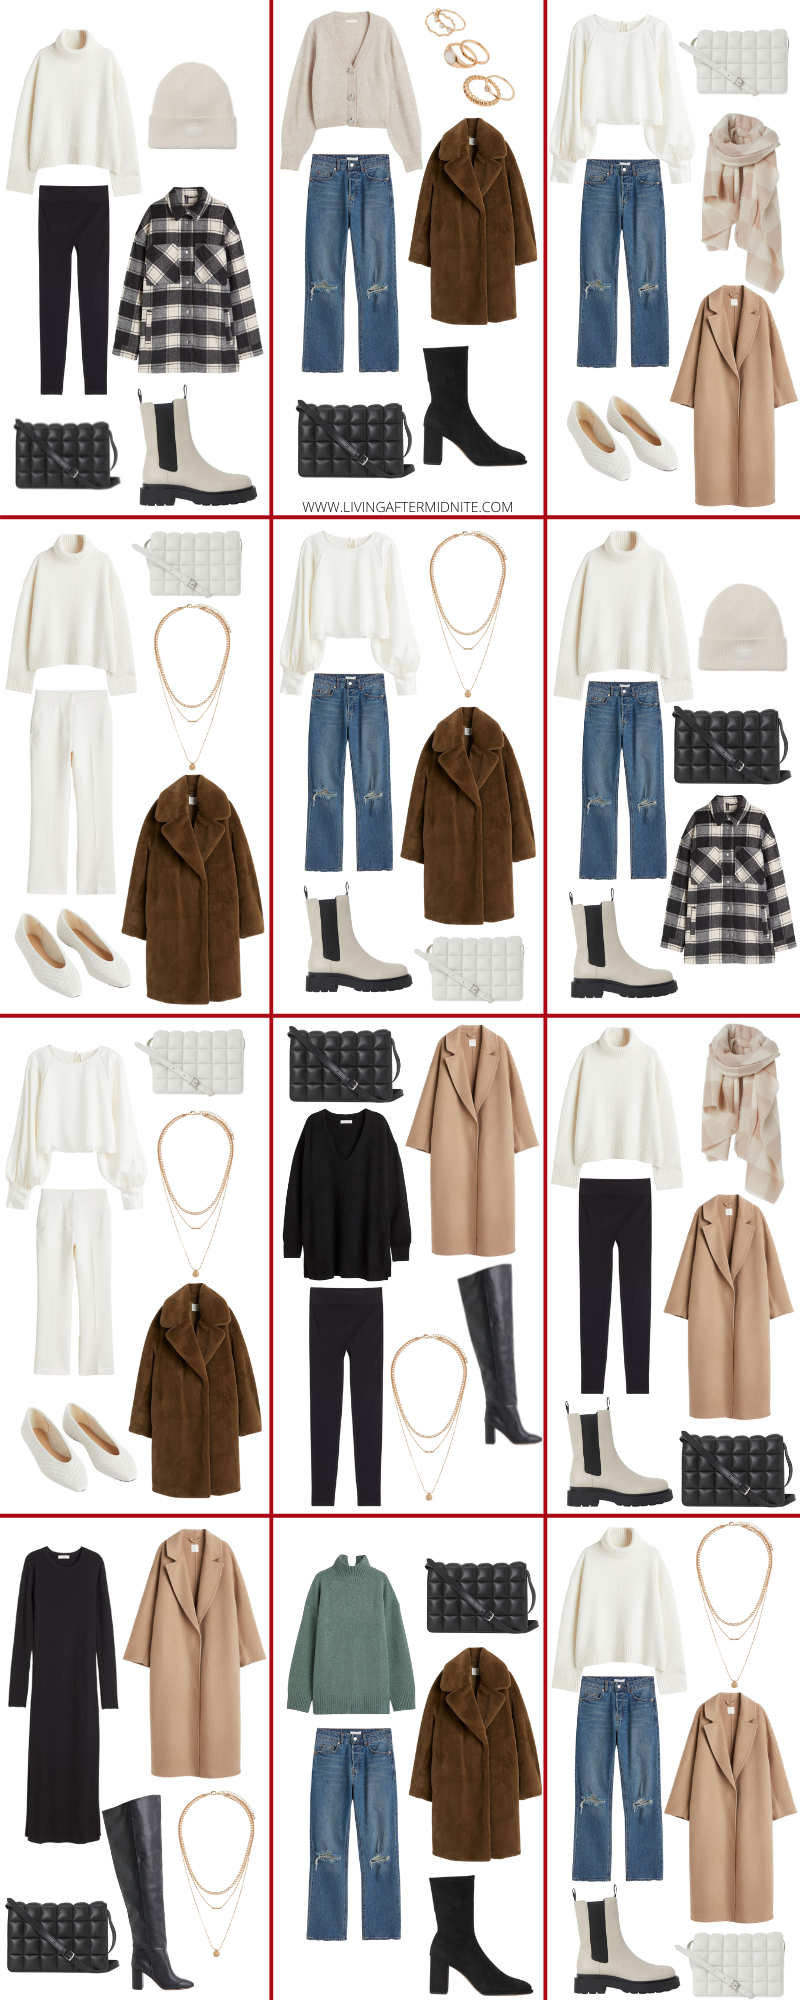 Affordable H&M Winter Capsule Wardrobe Items | How to Build a Capsule Wardrobe | H&M Winter Clothes | Outfit Inspiration | Winter Fashion | 48 Cold Weather Outfit Ideas | Winter Outfits 2022 | Winter Outfit Ideas